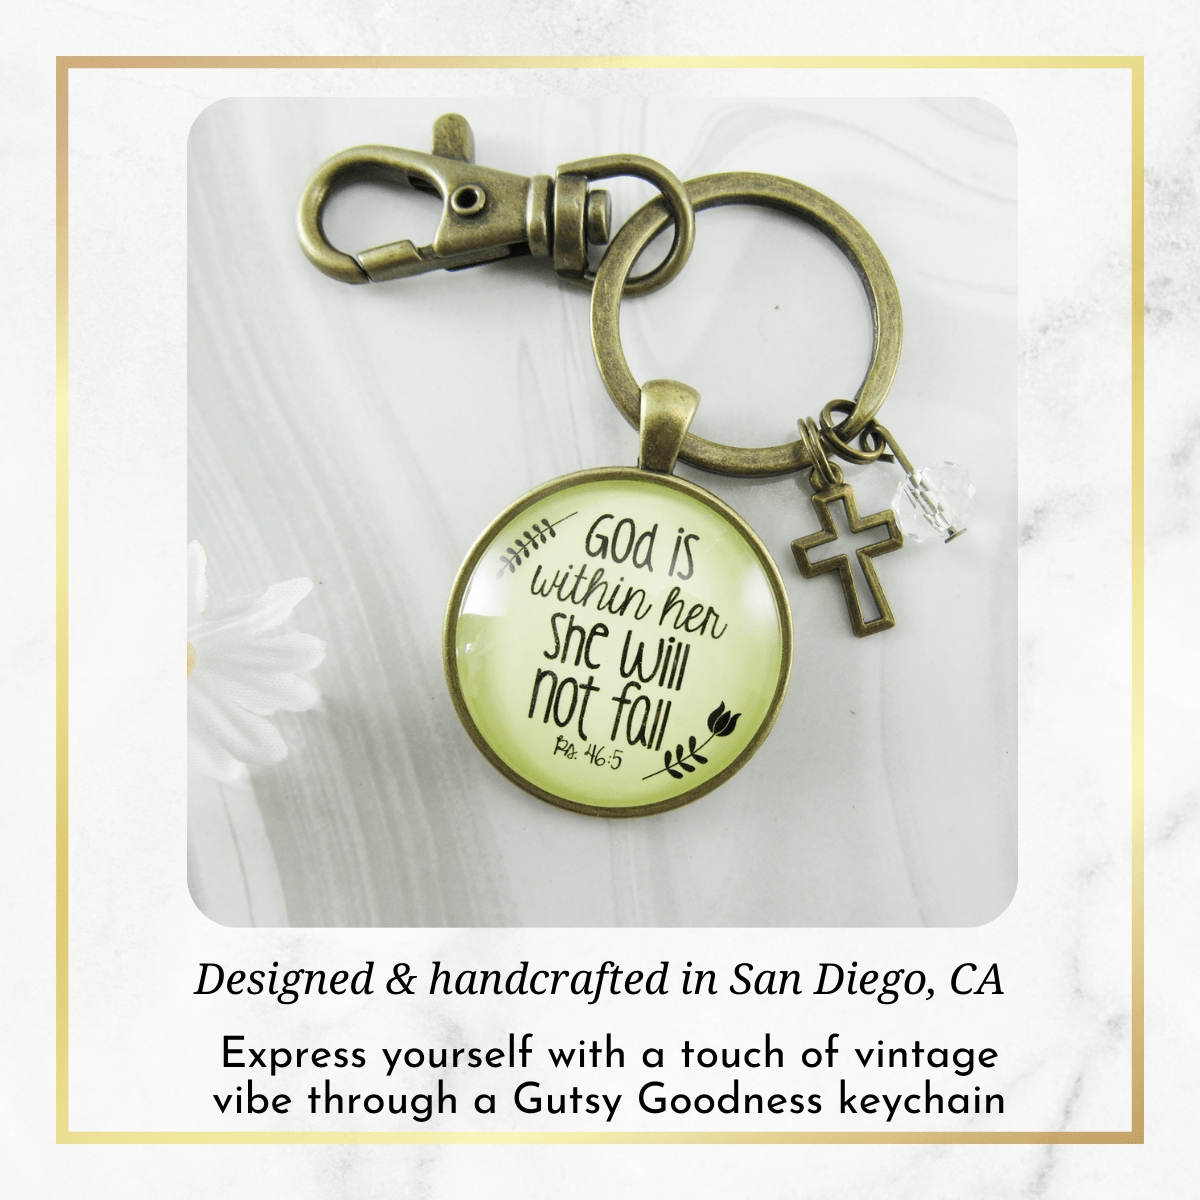 God is Within Her Charm Keychain She Will Not Fall Woman of Faith Pendant Charm Gift - Gutsy Goodness;God Is Within Her Charm Keychain She Will Not Fall Woman Of Faith Pendant Charm Gift - Gutsy Goodness Handmade Jewelry Gifts